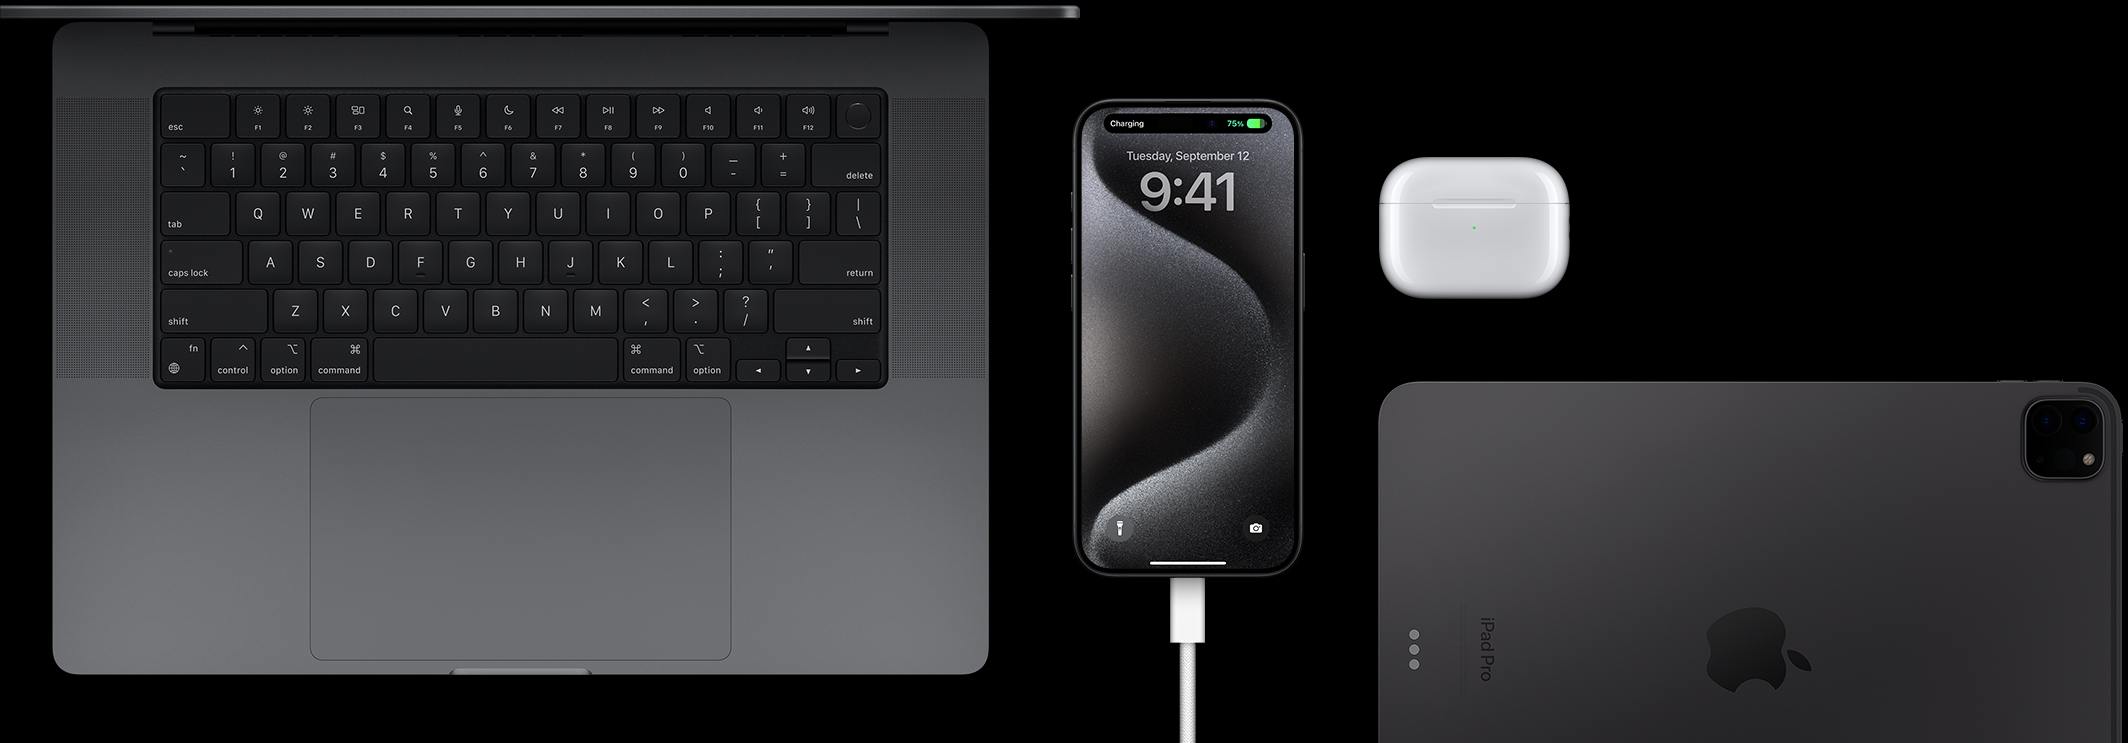 iPhone 15 Pro with a USB-C cord plugged into it surrounded by a Macbook Pro, an AirPods Pro, and an iPad